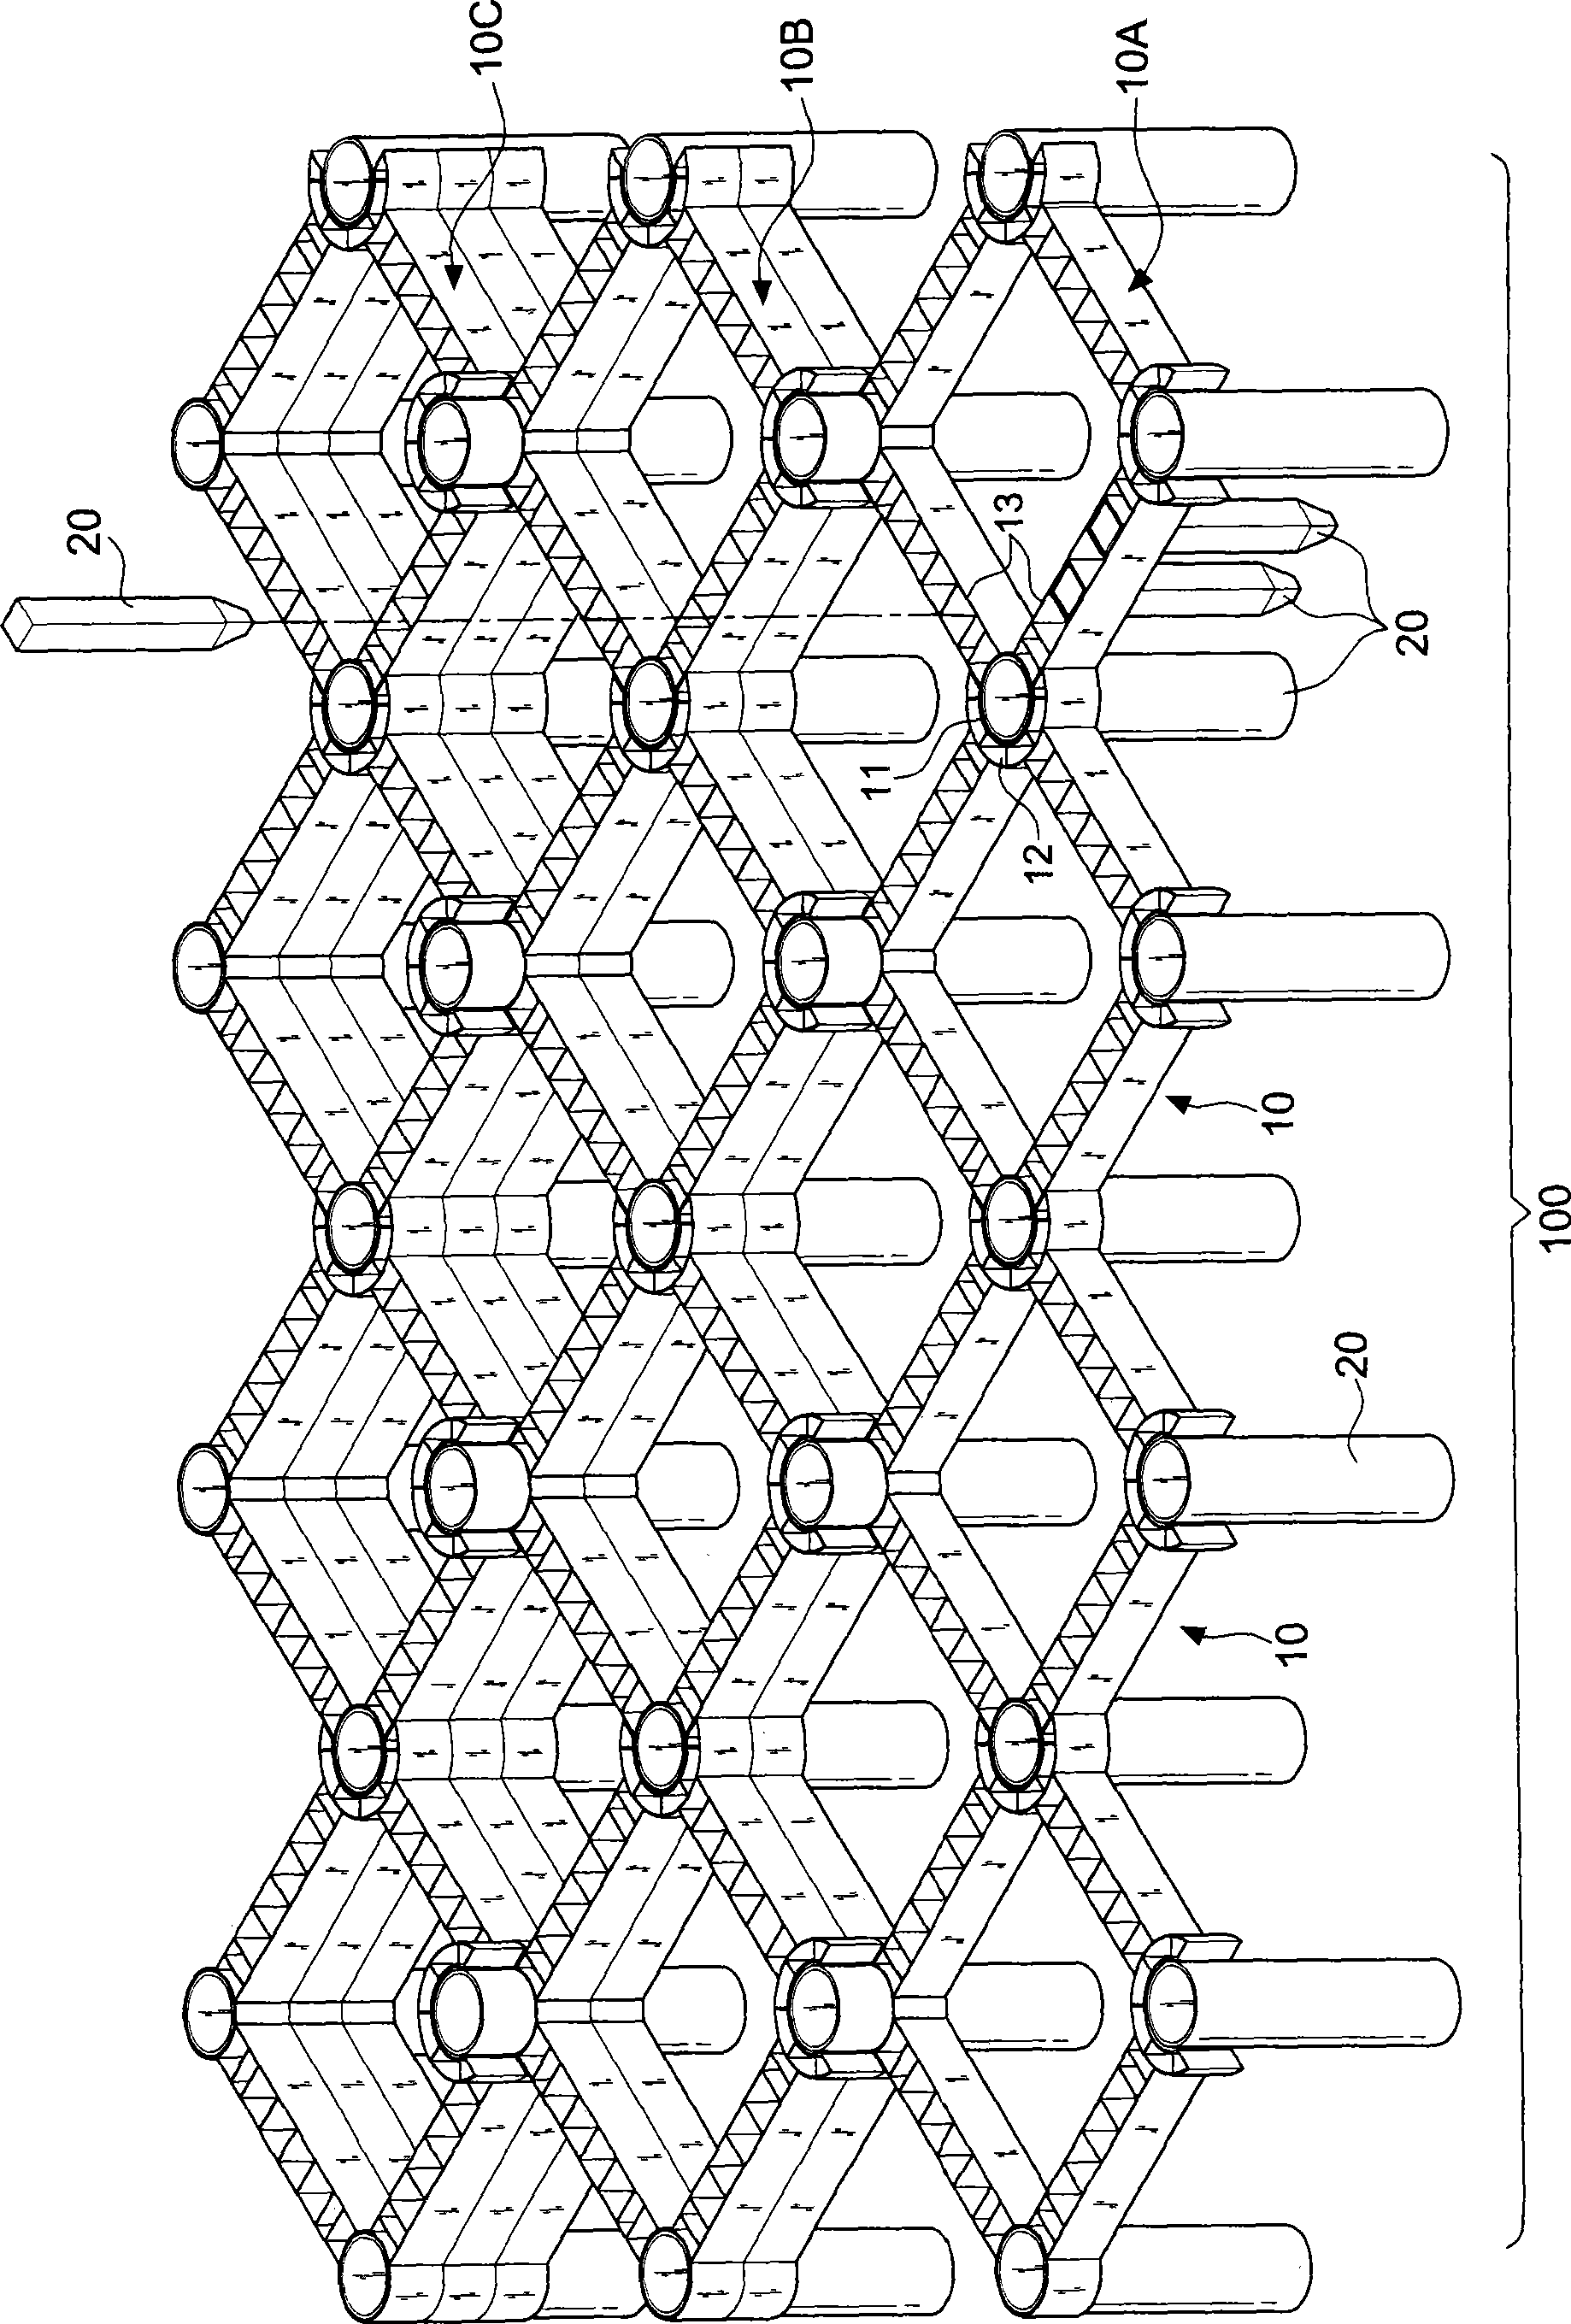 Tenon joint type spatial mesh structure